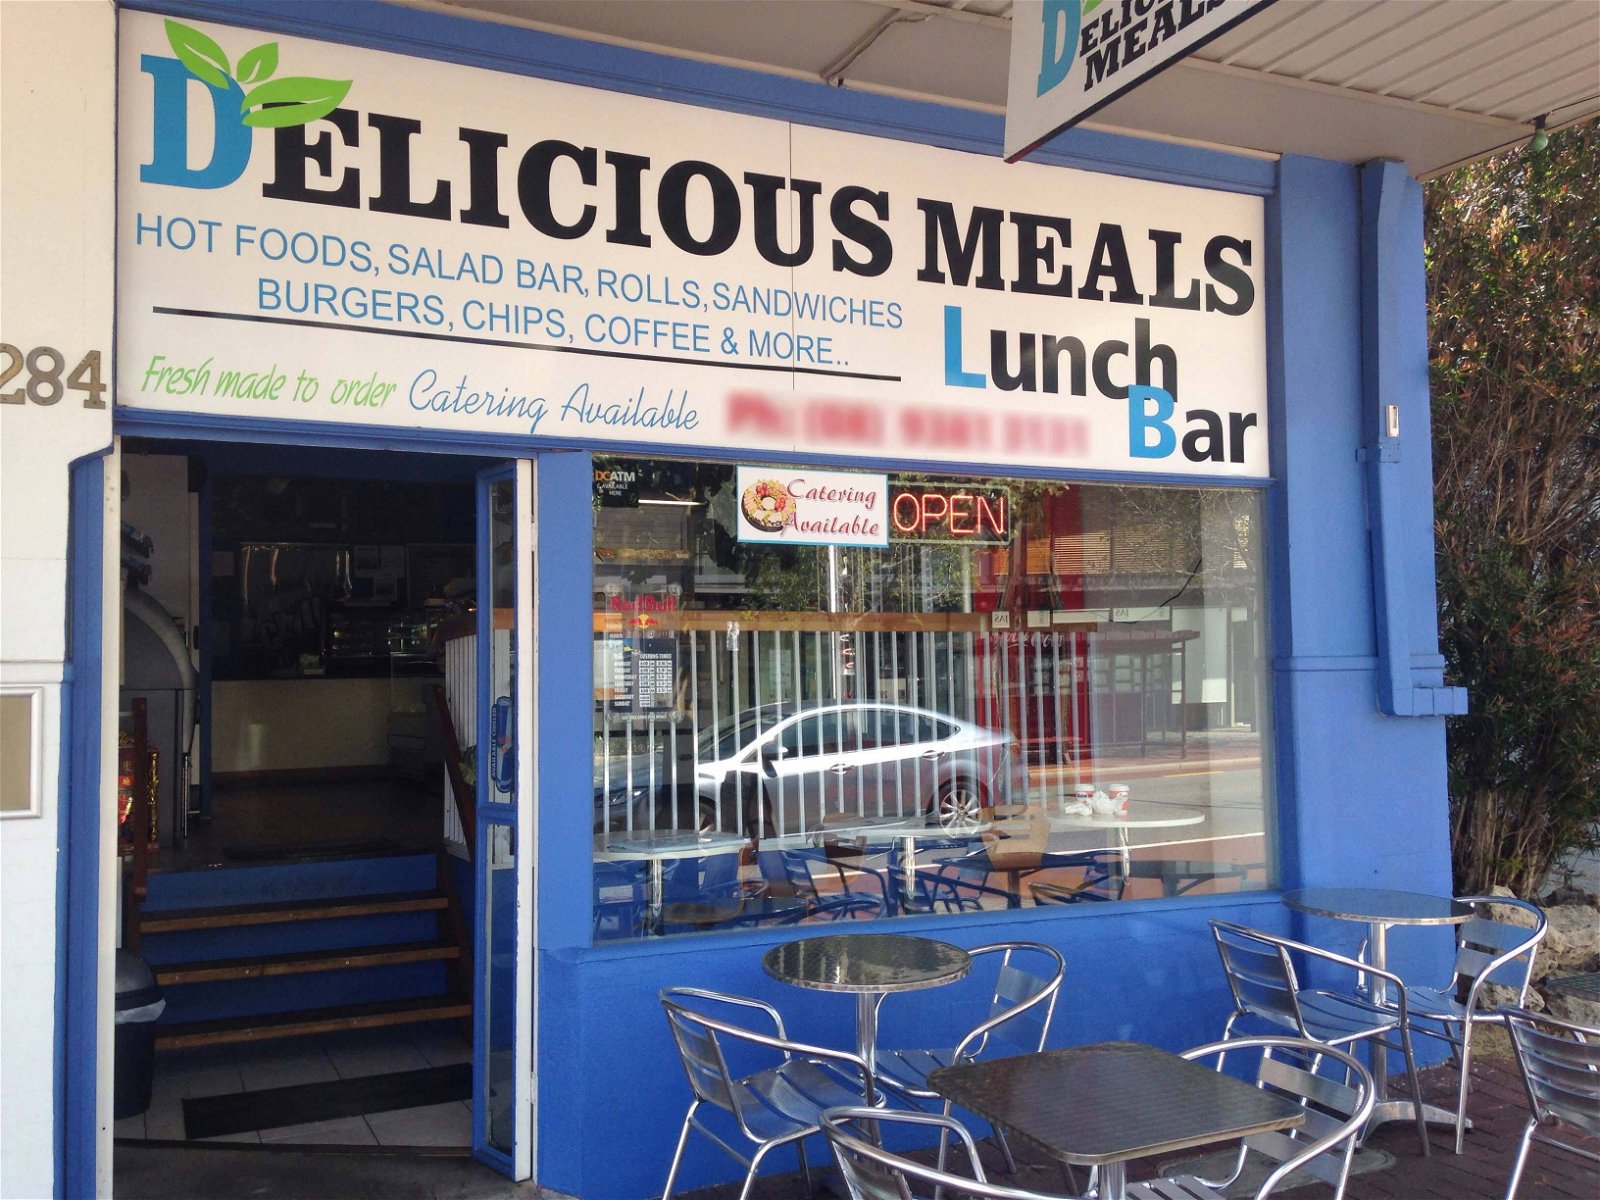 Delicious Meals Lunchbar - Surfers Paradise Gold Coast